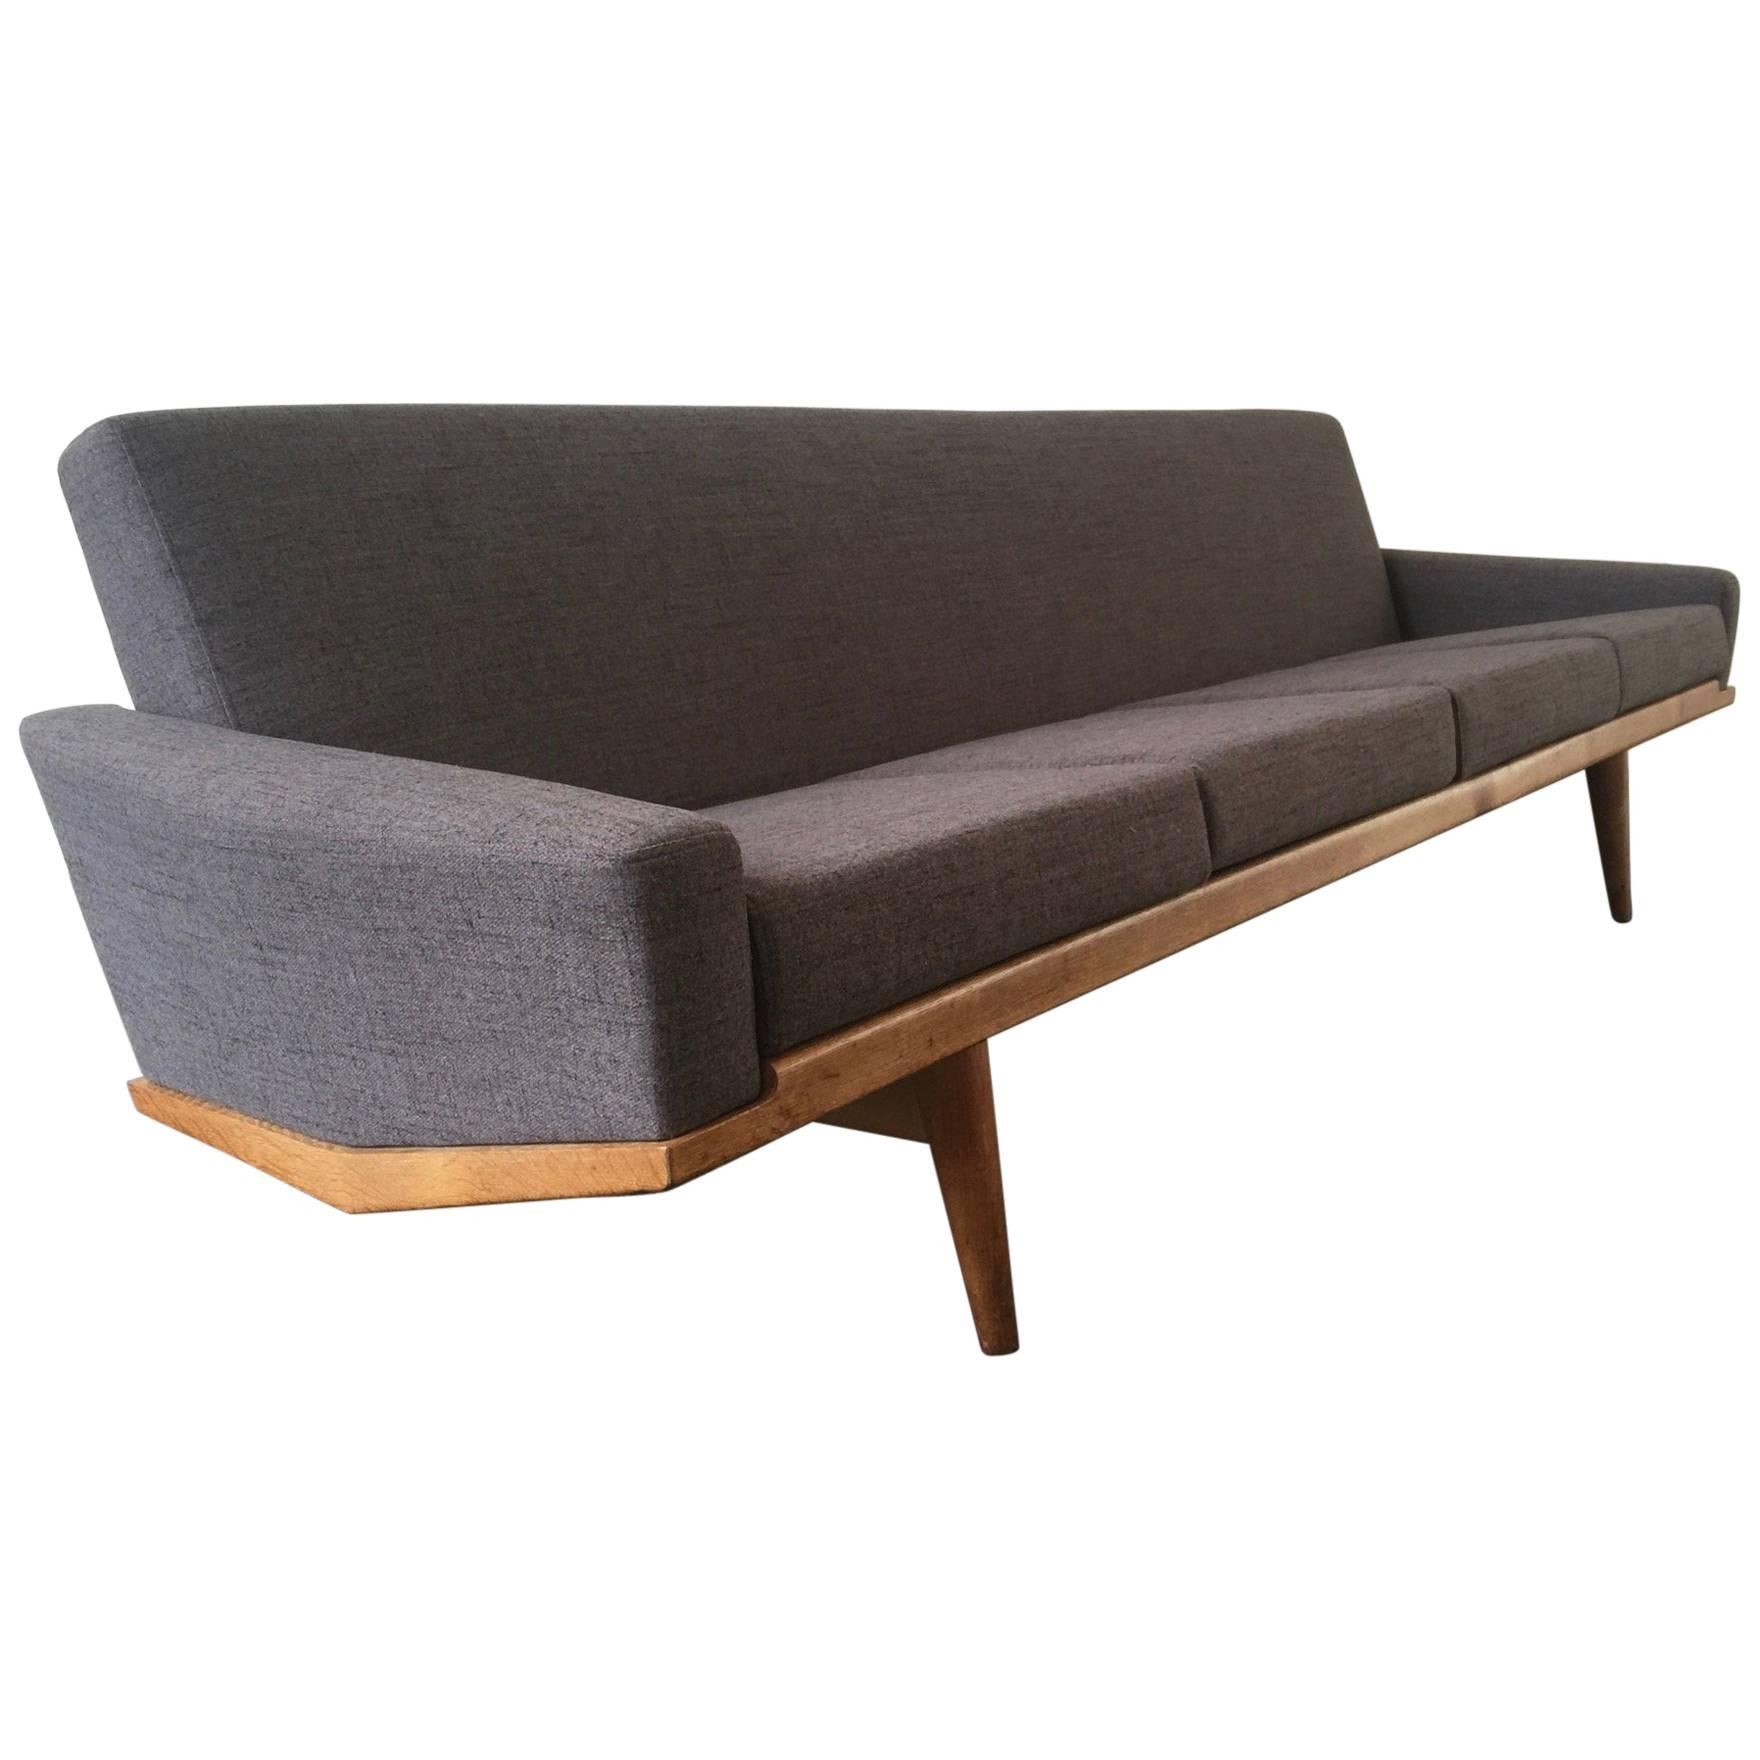 Rare Four-Seat No. 221 Sofa by H. W. Klein, Professional Re-Upholstered